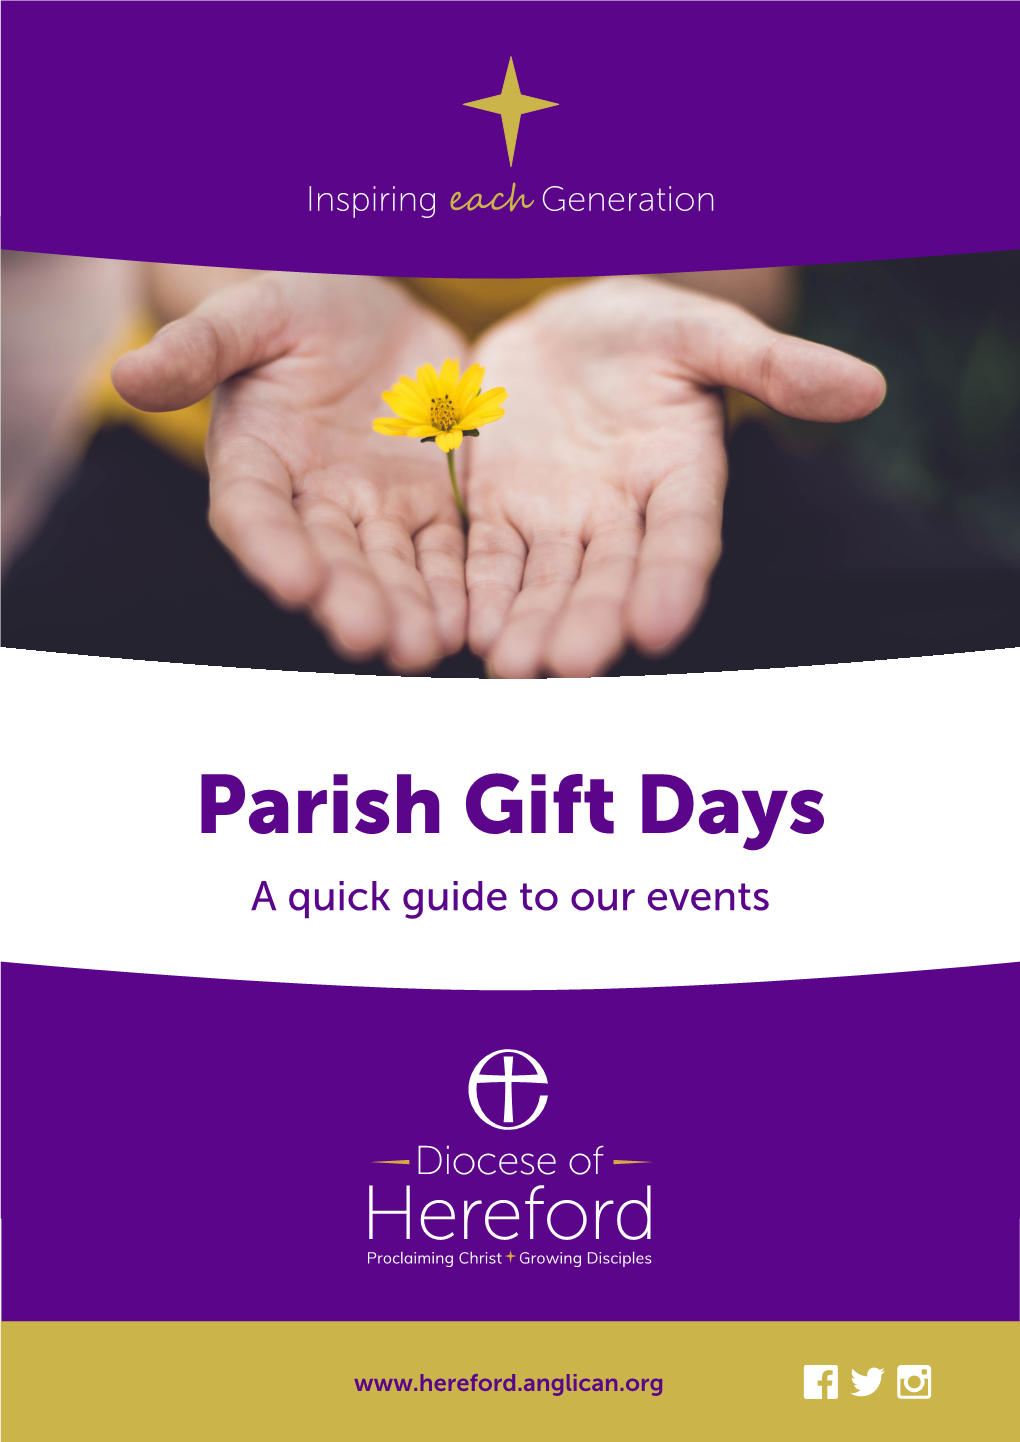 Parish Gift Days a Quick Guide to Our Events